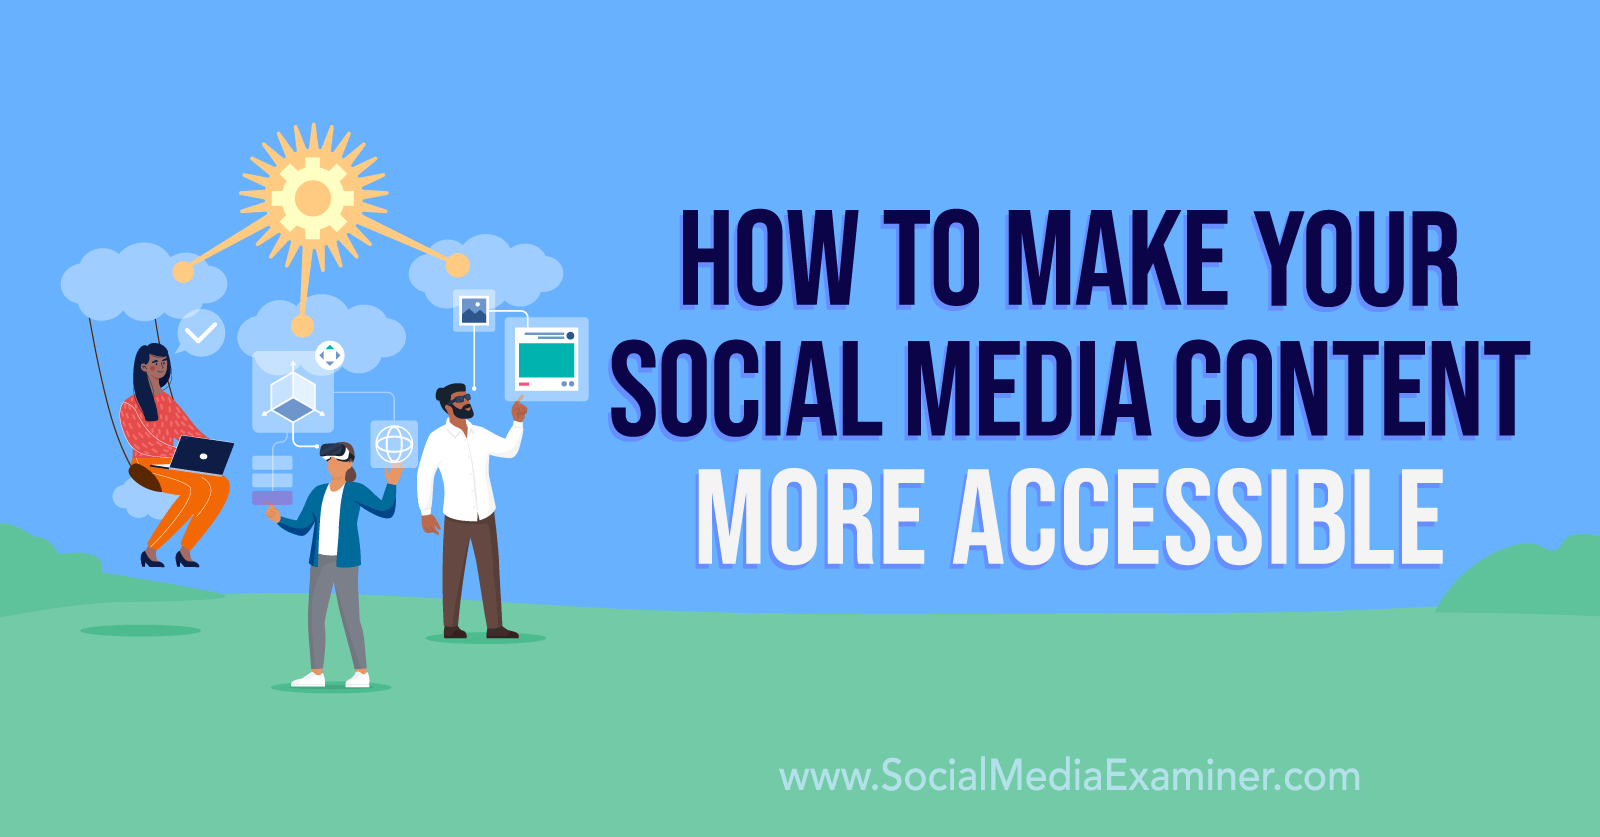 How to Make Your Social Media Content More Accessible by Social Media Examiner